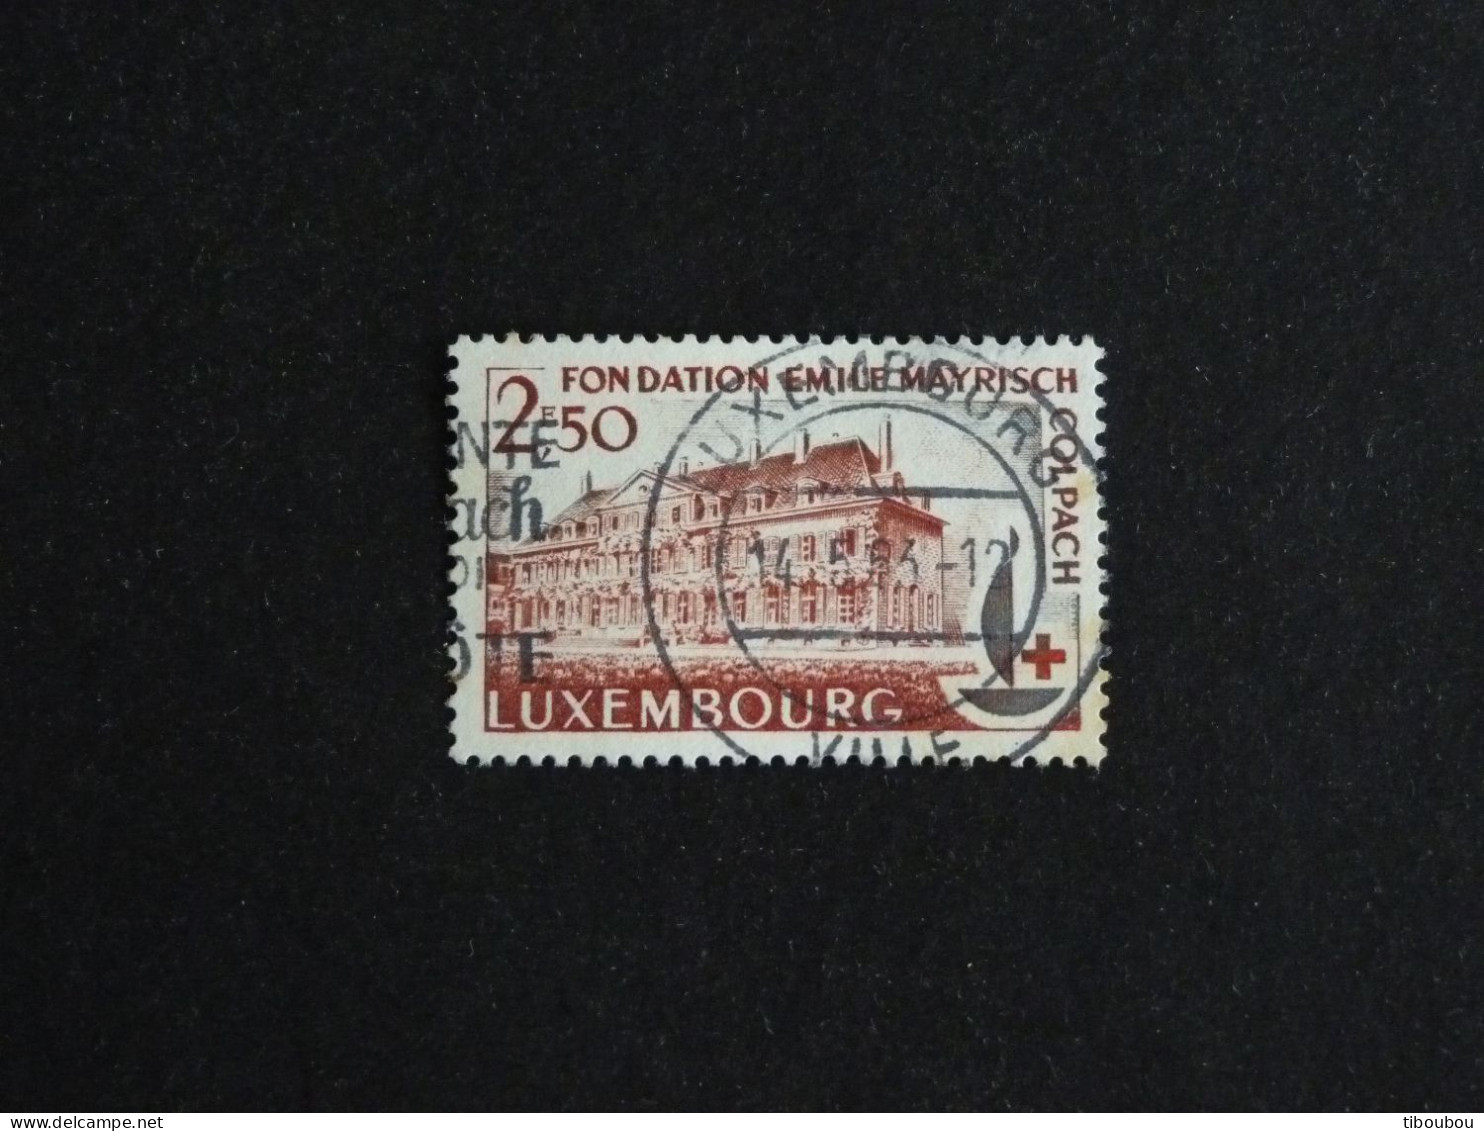 LUXEMBOURG LUXEMBURG YT 632 OBLITERE - CROIX ROUGE INTERNATIONALE / FONDATION EMILE MAYRISCH A COLPACH - Used Stamps